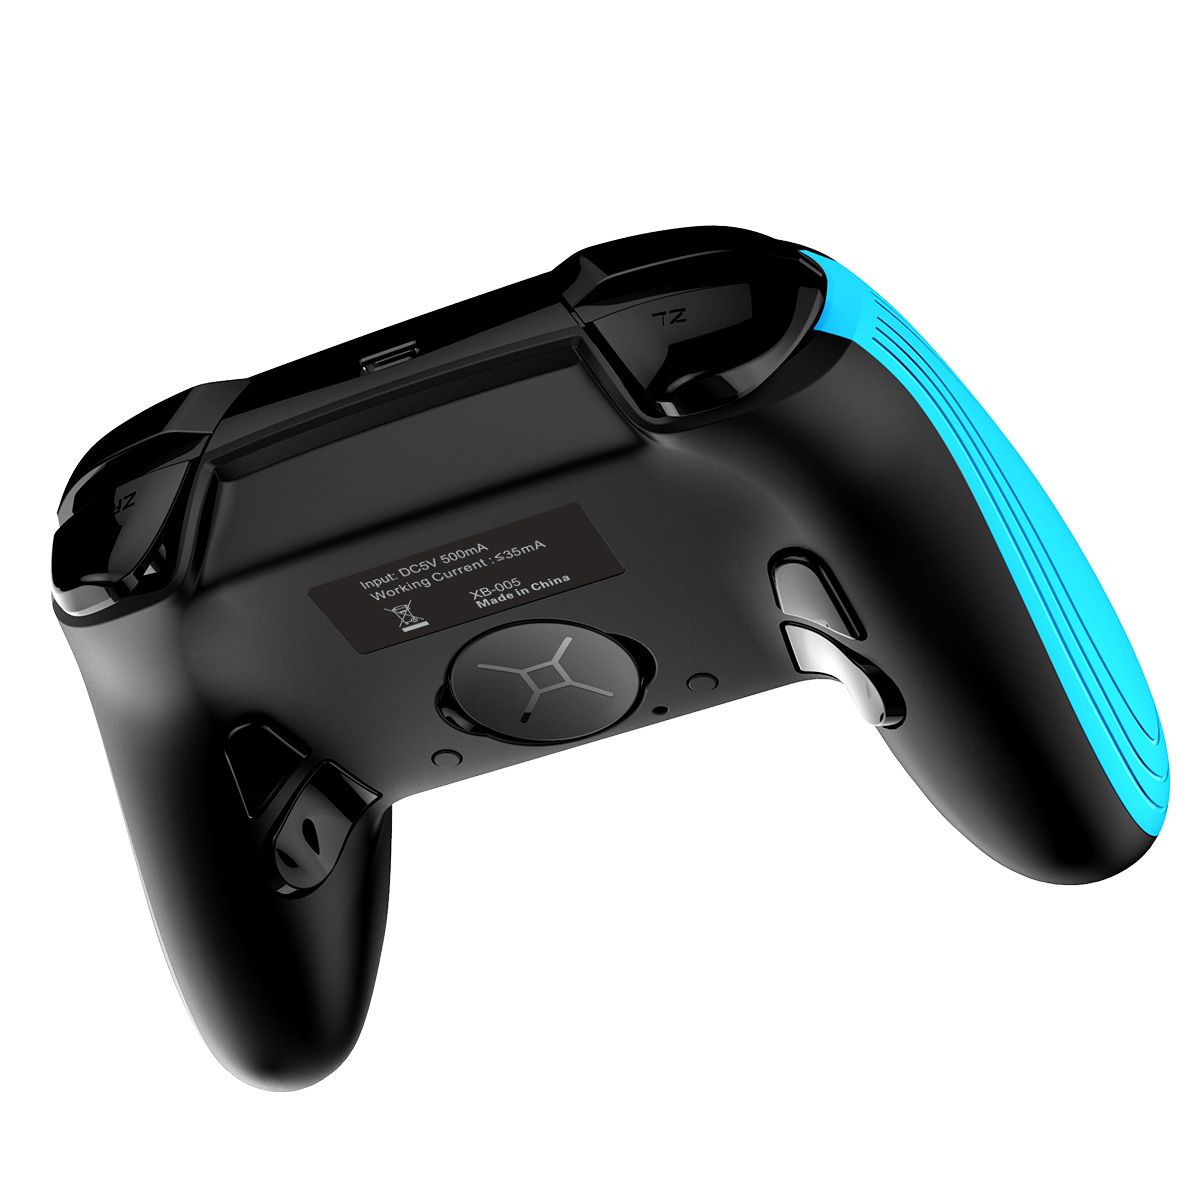 iPega-PG-9139-Wireless-bluetooth-Game-Controller-Gamepad-Joystick-for-Android-Tablet-PC-TV-BOX-1532926